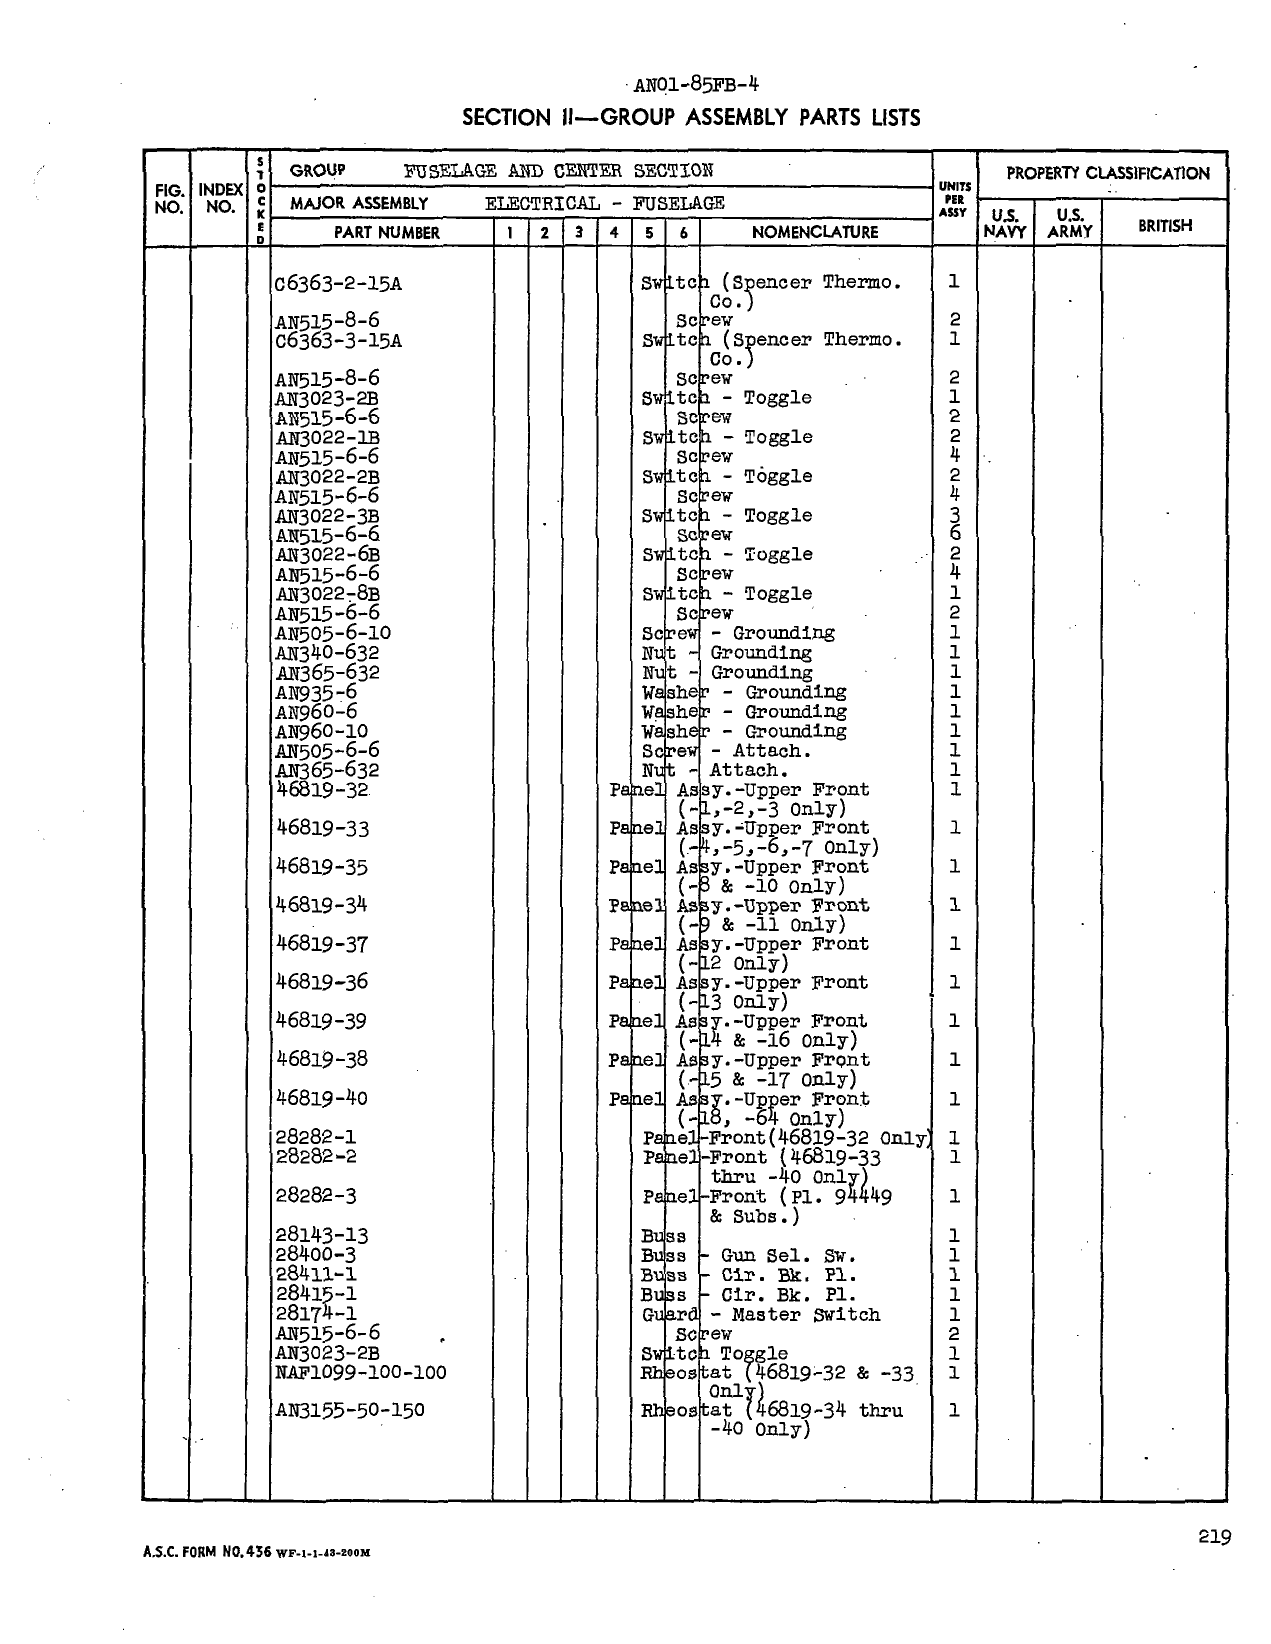 Sample page 227 from AirCorps Library document: Parts Catalog - F6F-3, F6F-5